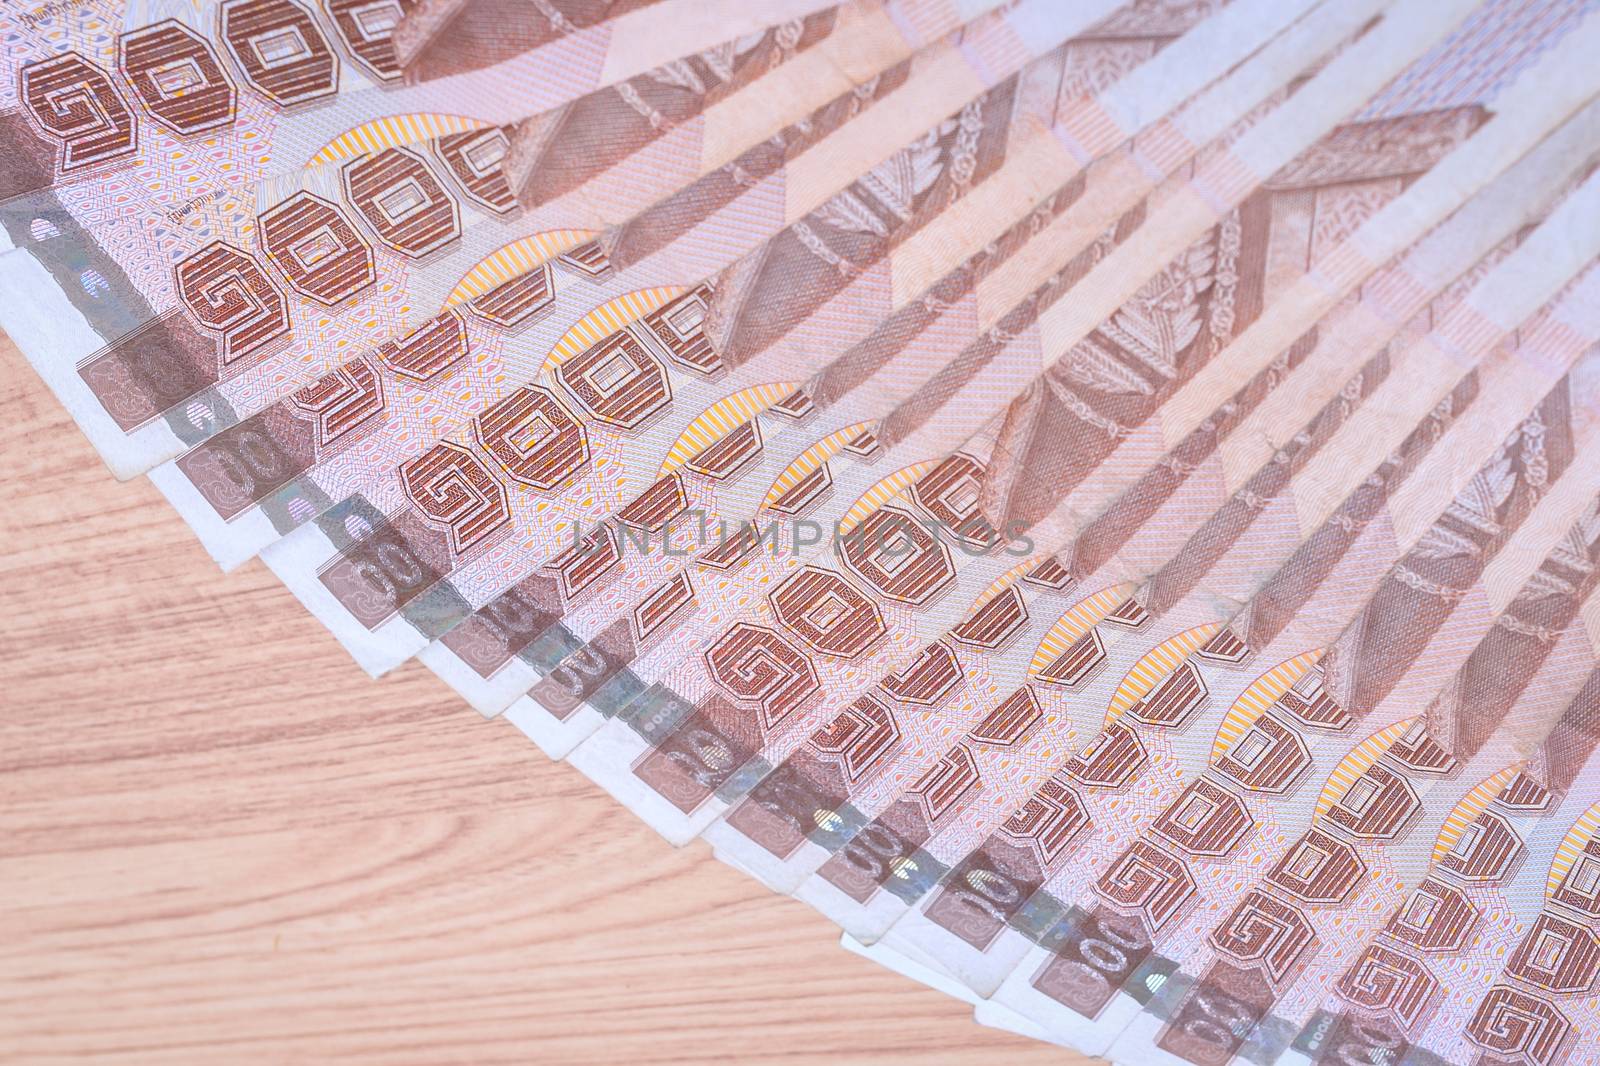 Thai baht banknotes on table background